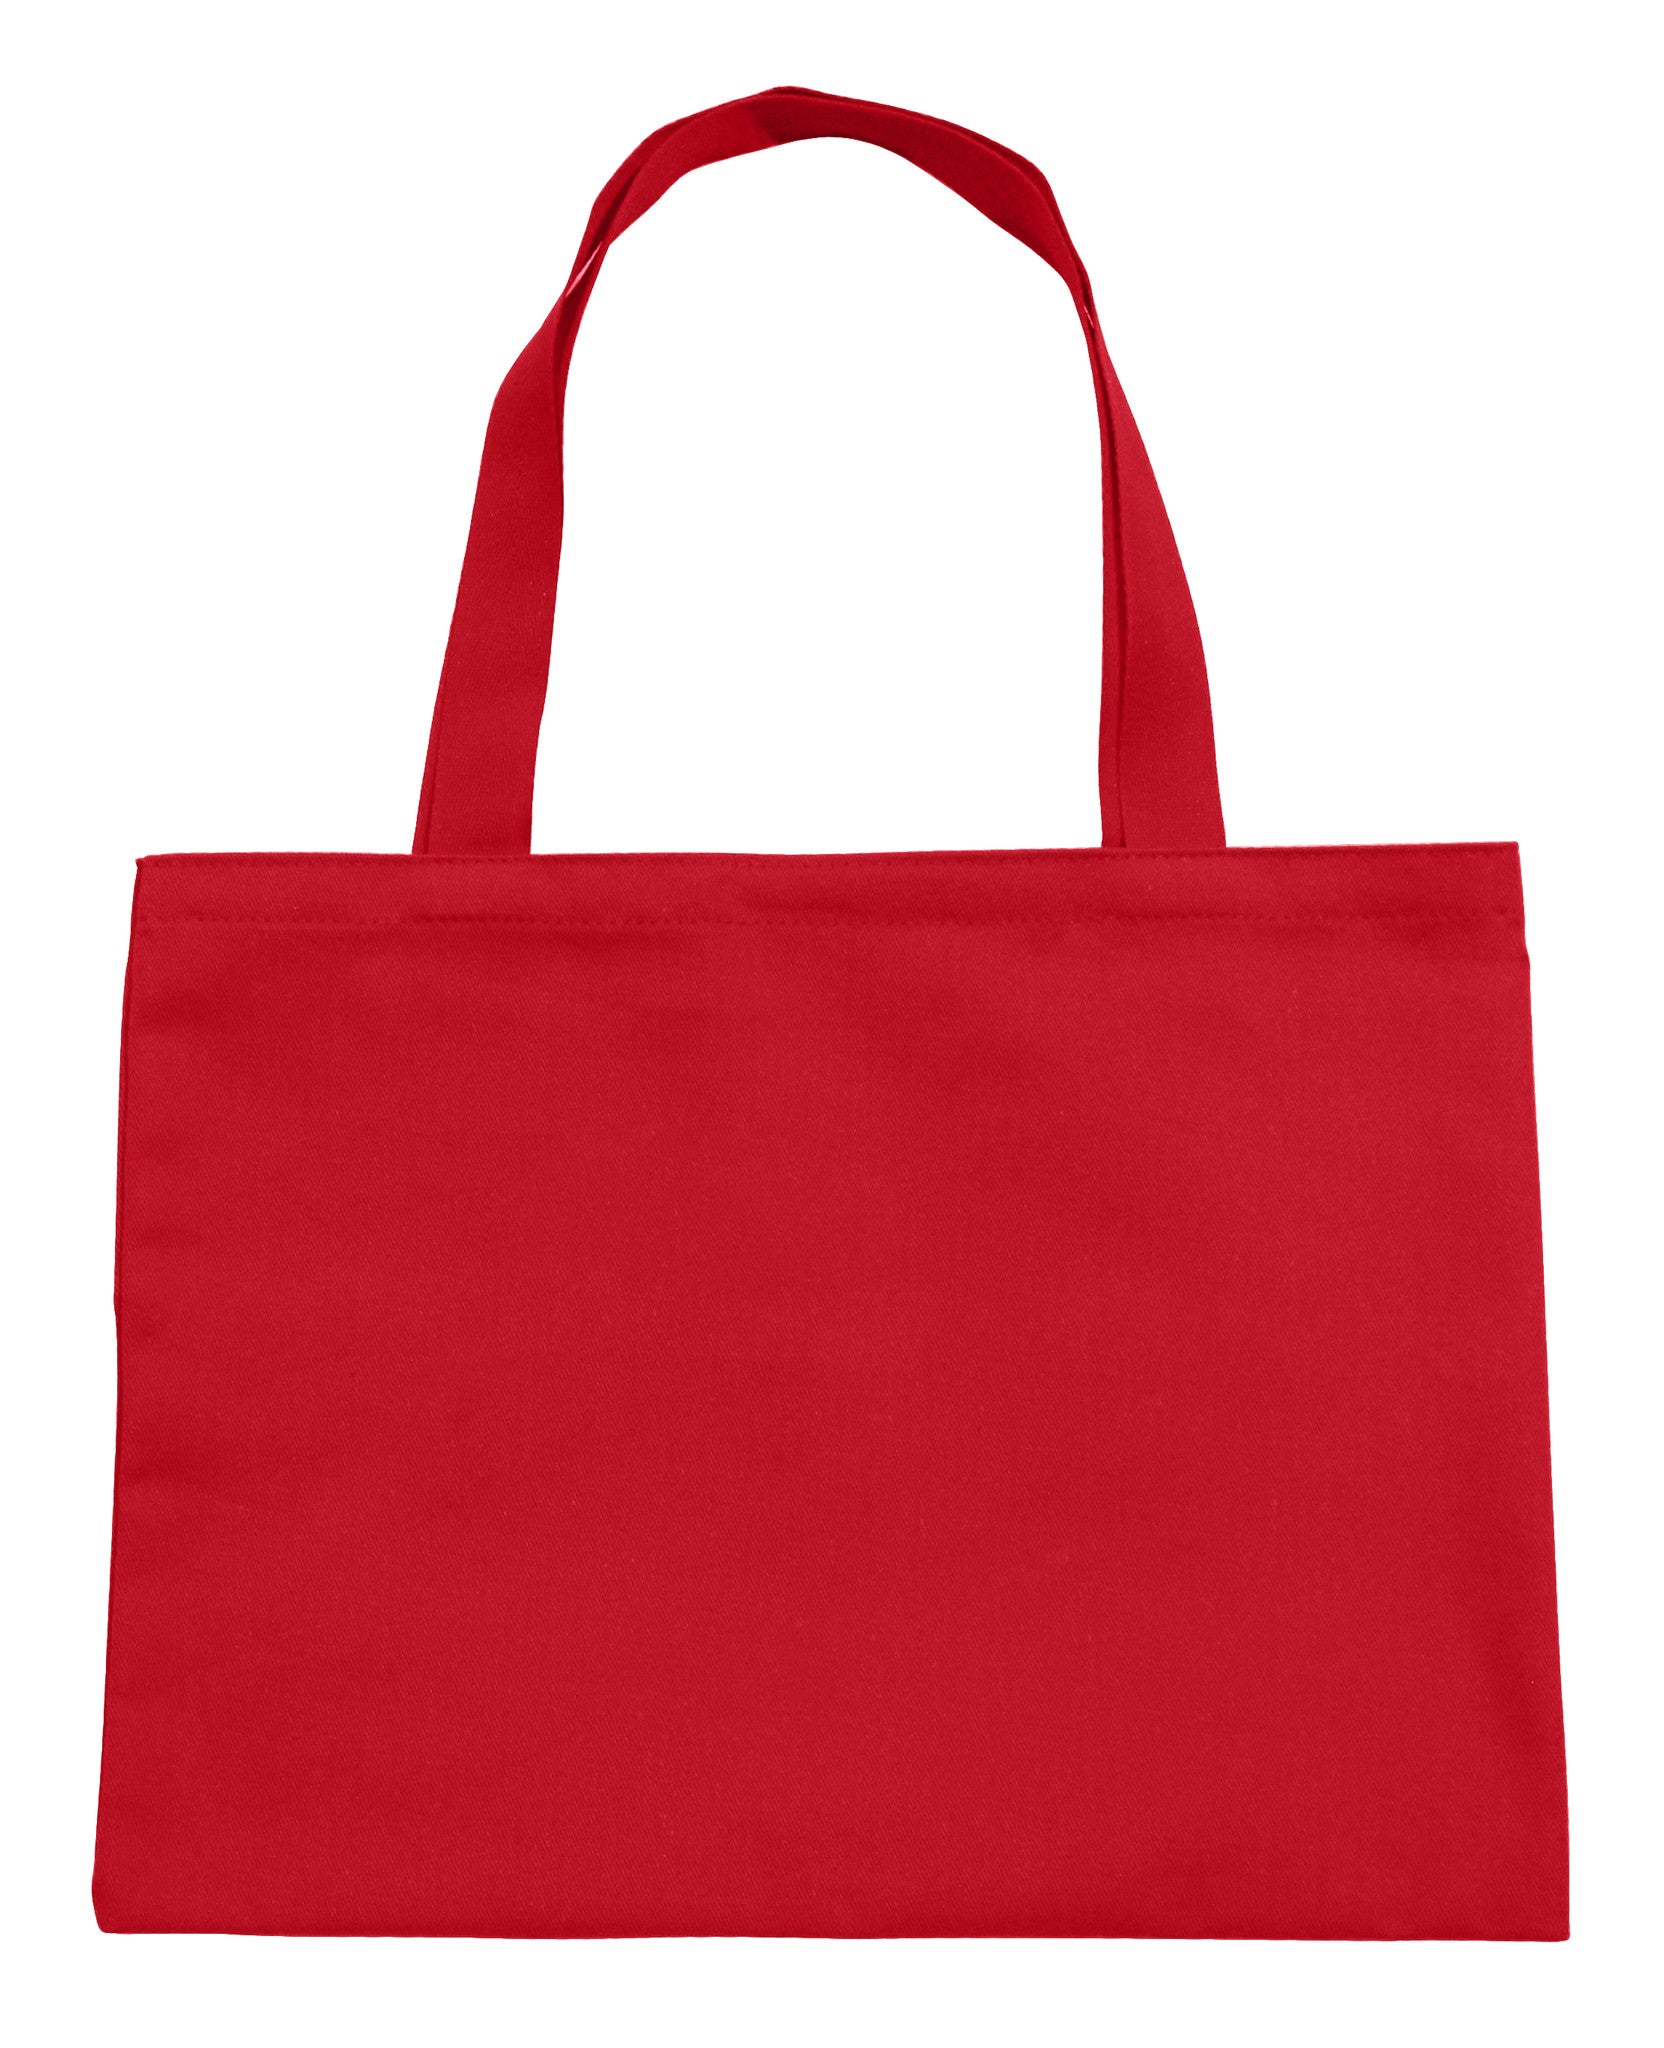 Clippy liner for small Clippy tote bag - basic version in red